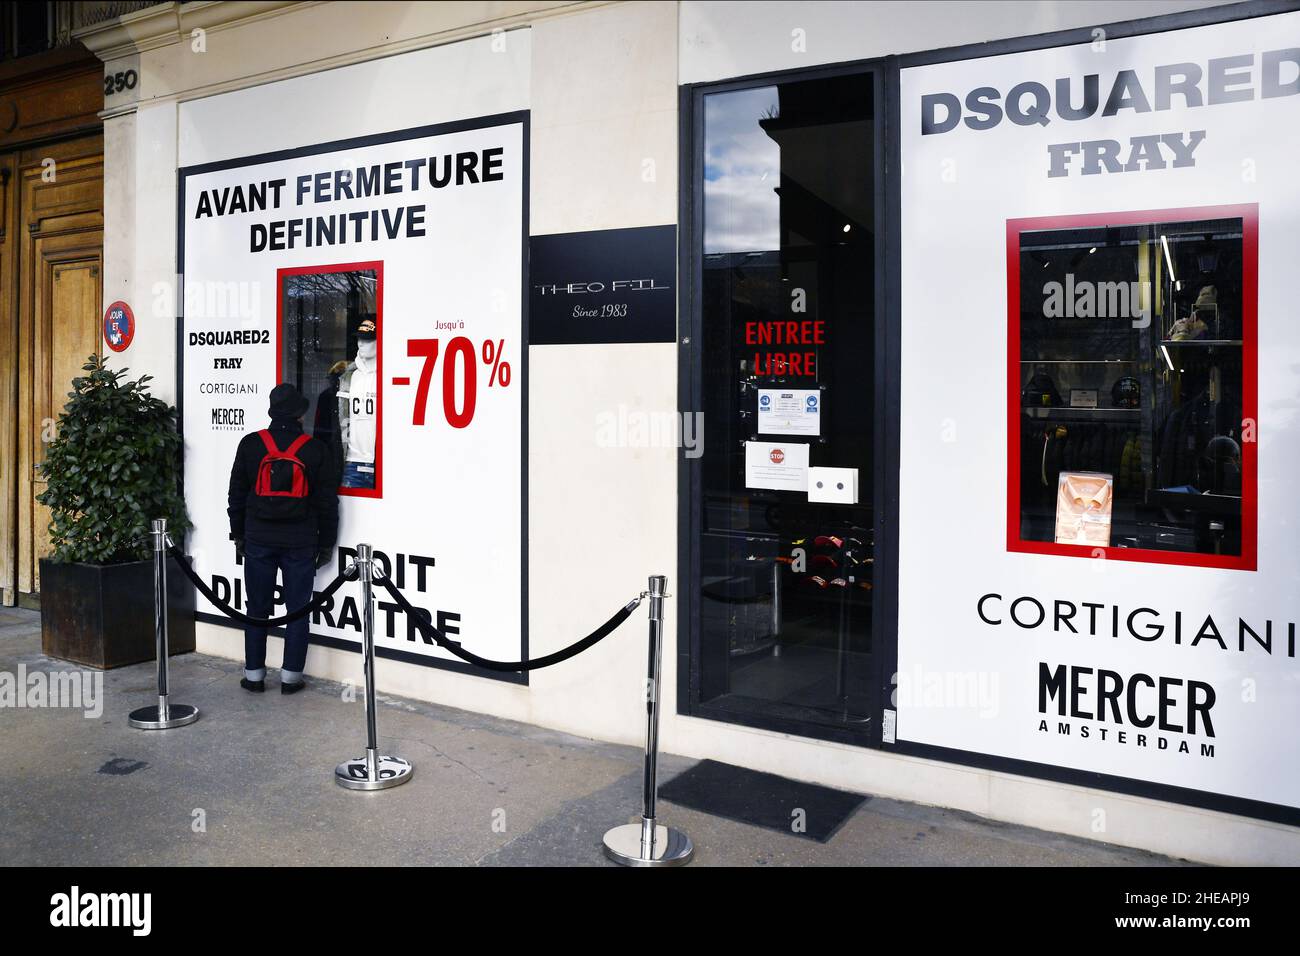 Shops closed by COVID Crisis and traffic difficulties of circulation - Rue de Rivoli - Paris - France Stock Photo